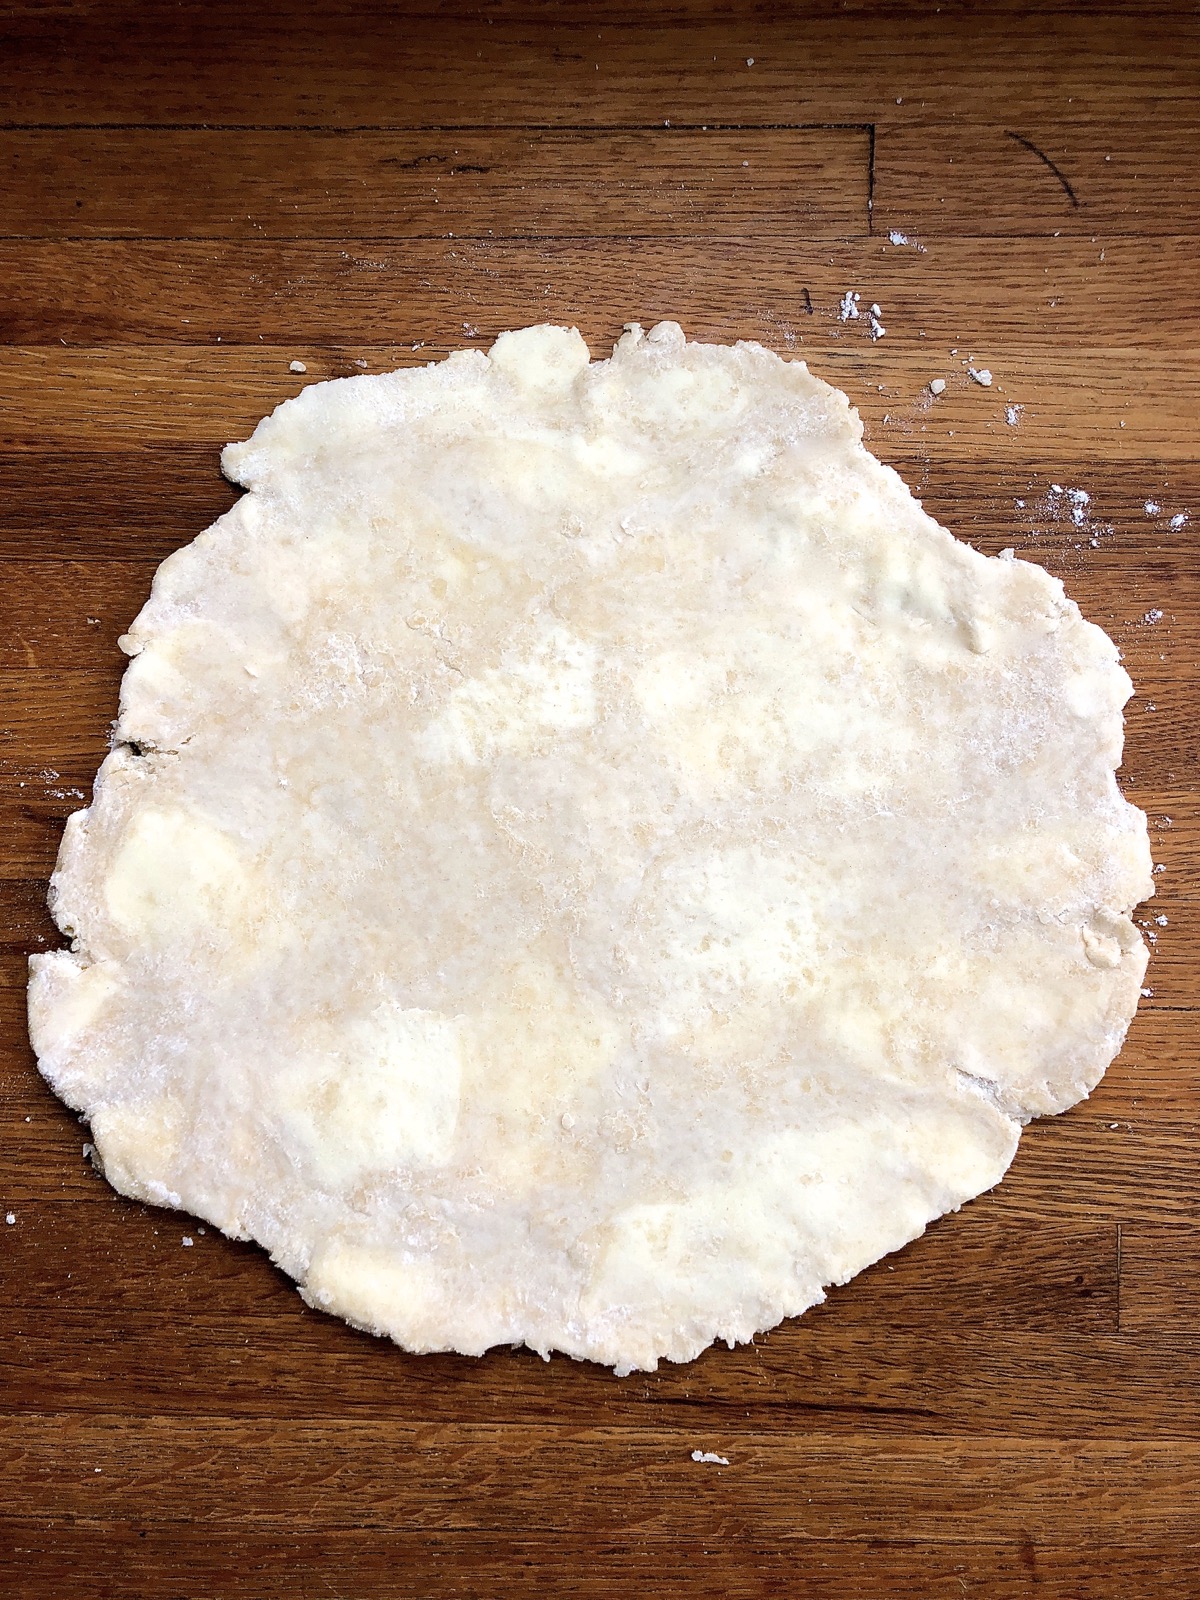 Pie crust rolled into a round, with flattened "sheetlets" of butter visible.